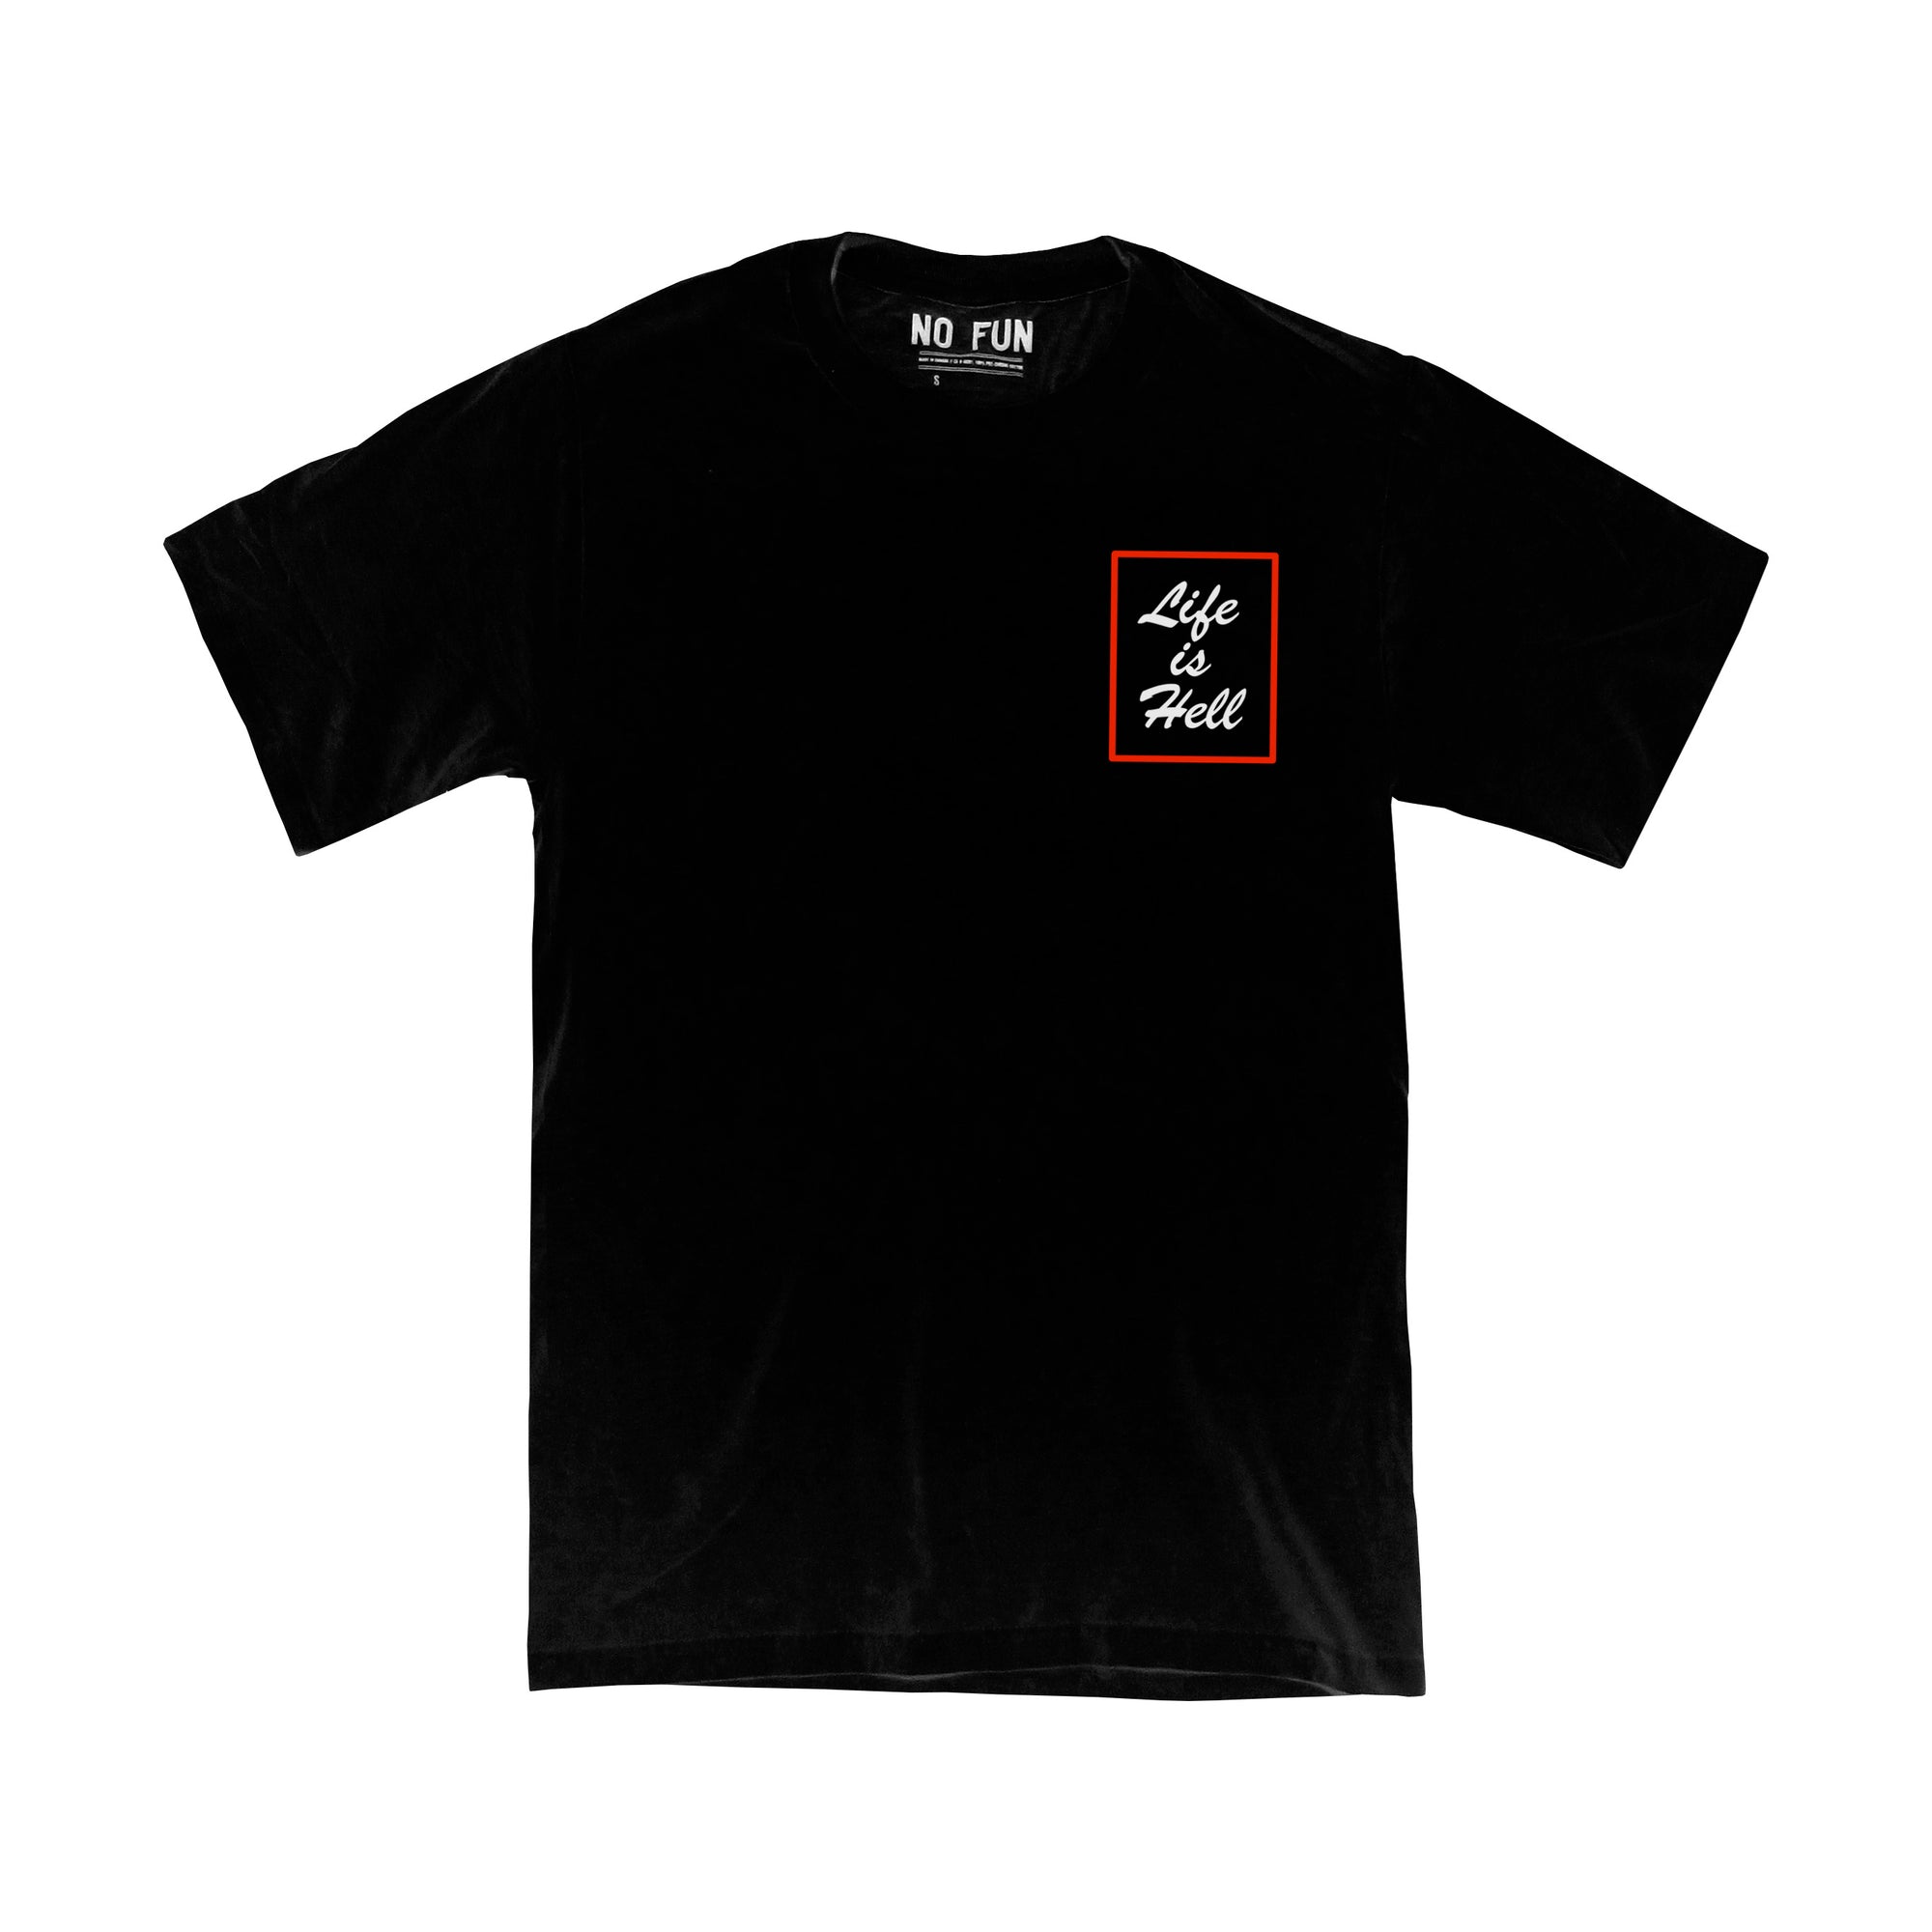 The "Life is Hell" T-shirt by No Fun®.  T-shirt is black, and features a screen printed design on the breast.  The white text in the design reads "life is Hell" in a brush script font, and has a red stroke rectangle around it.